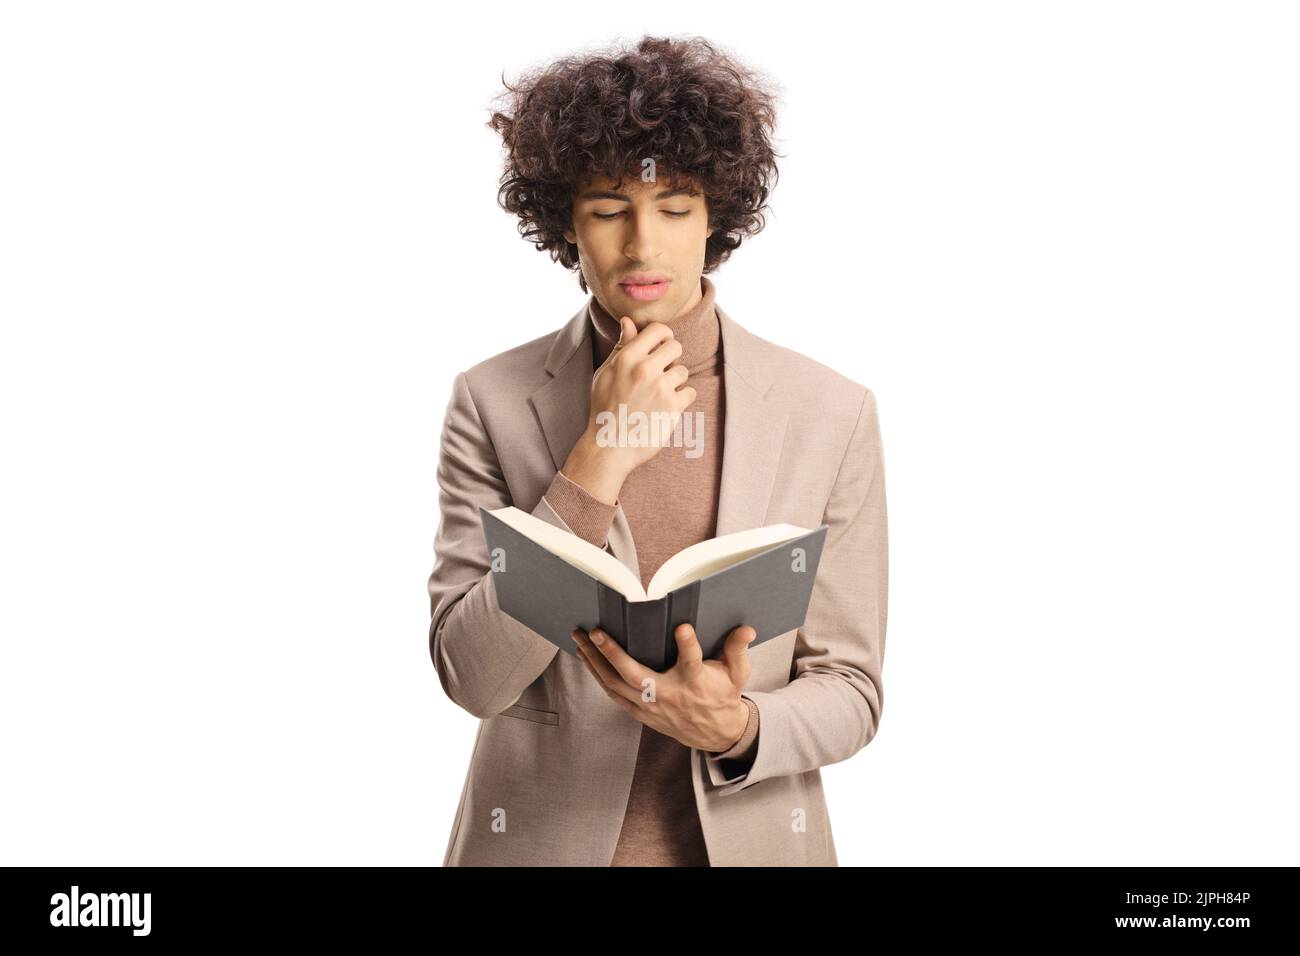 Young man with curly hair reading a book isolated on white background Stock Photo